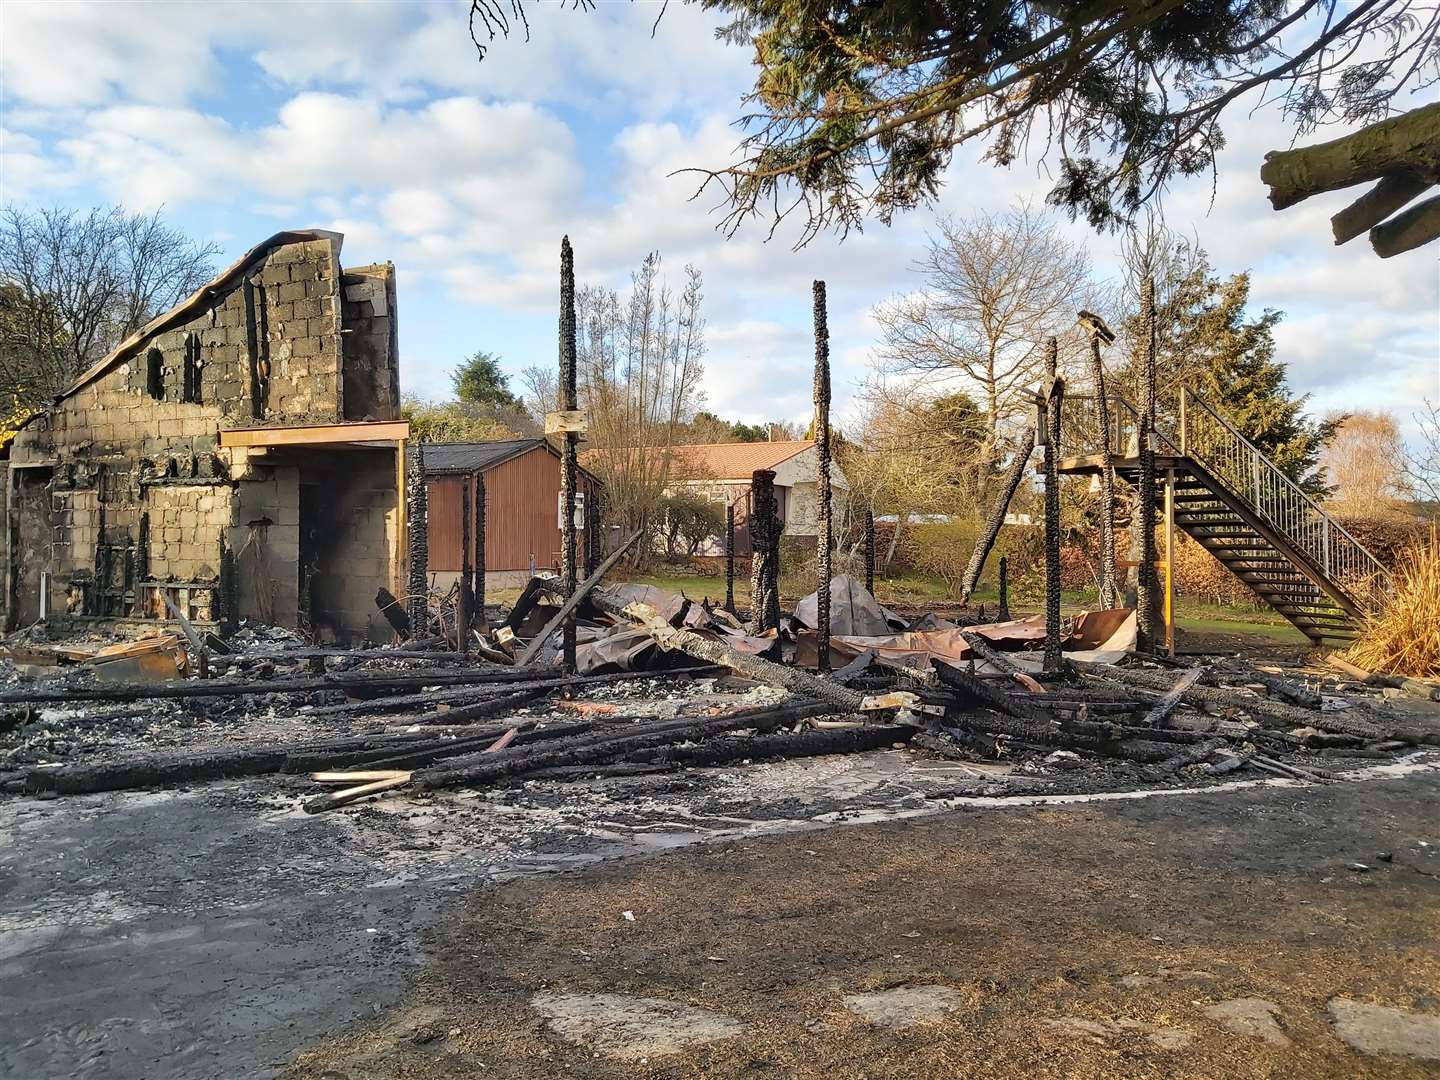 The Community Centre Extension 2 after the fire.